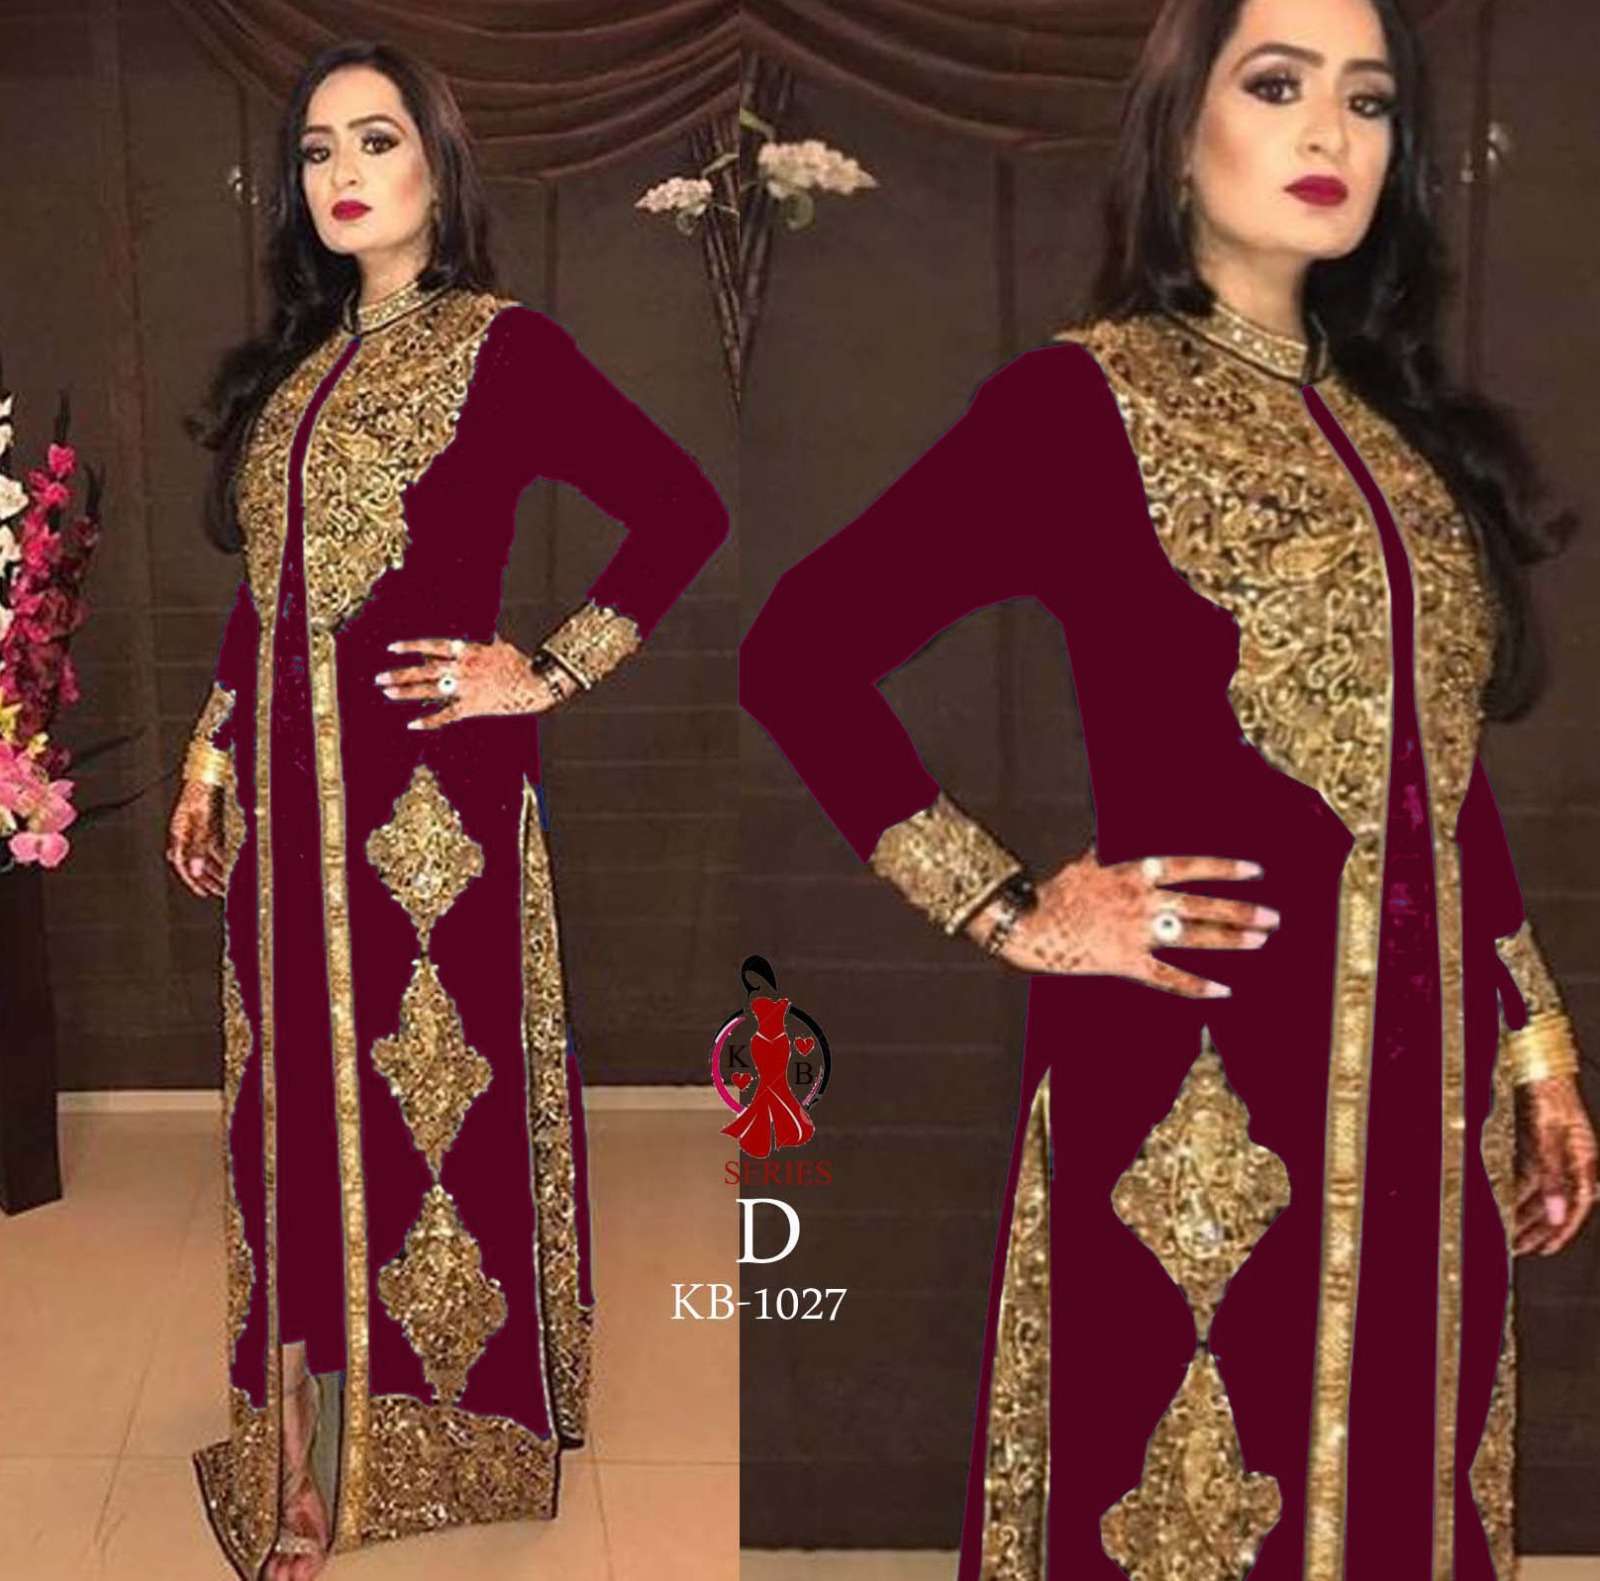 KB Series 1027 Party Wear Koti Style Designer Dress New Collection Supplier